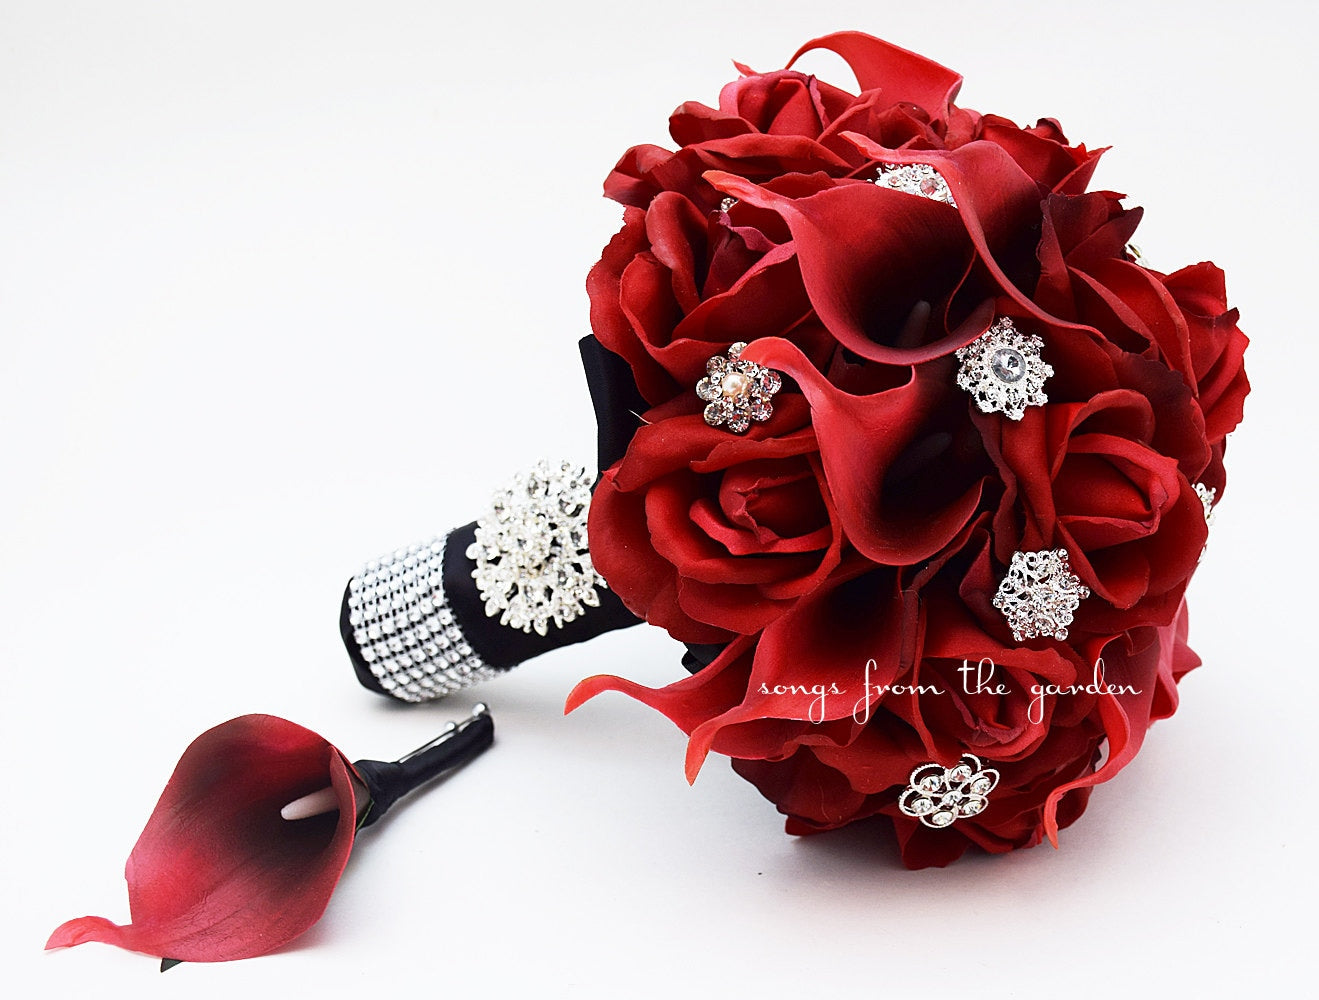 Red Roses Calla Lilies Rhinestones Bridal or Bridesmaid Bouquet - add Groom Groomsman Boutonniere Flower Crown, Corsage, Arch or Pew Flowers